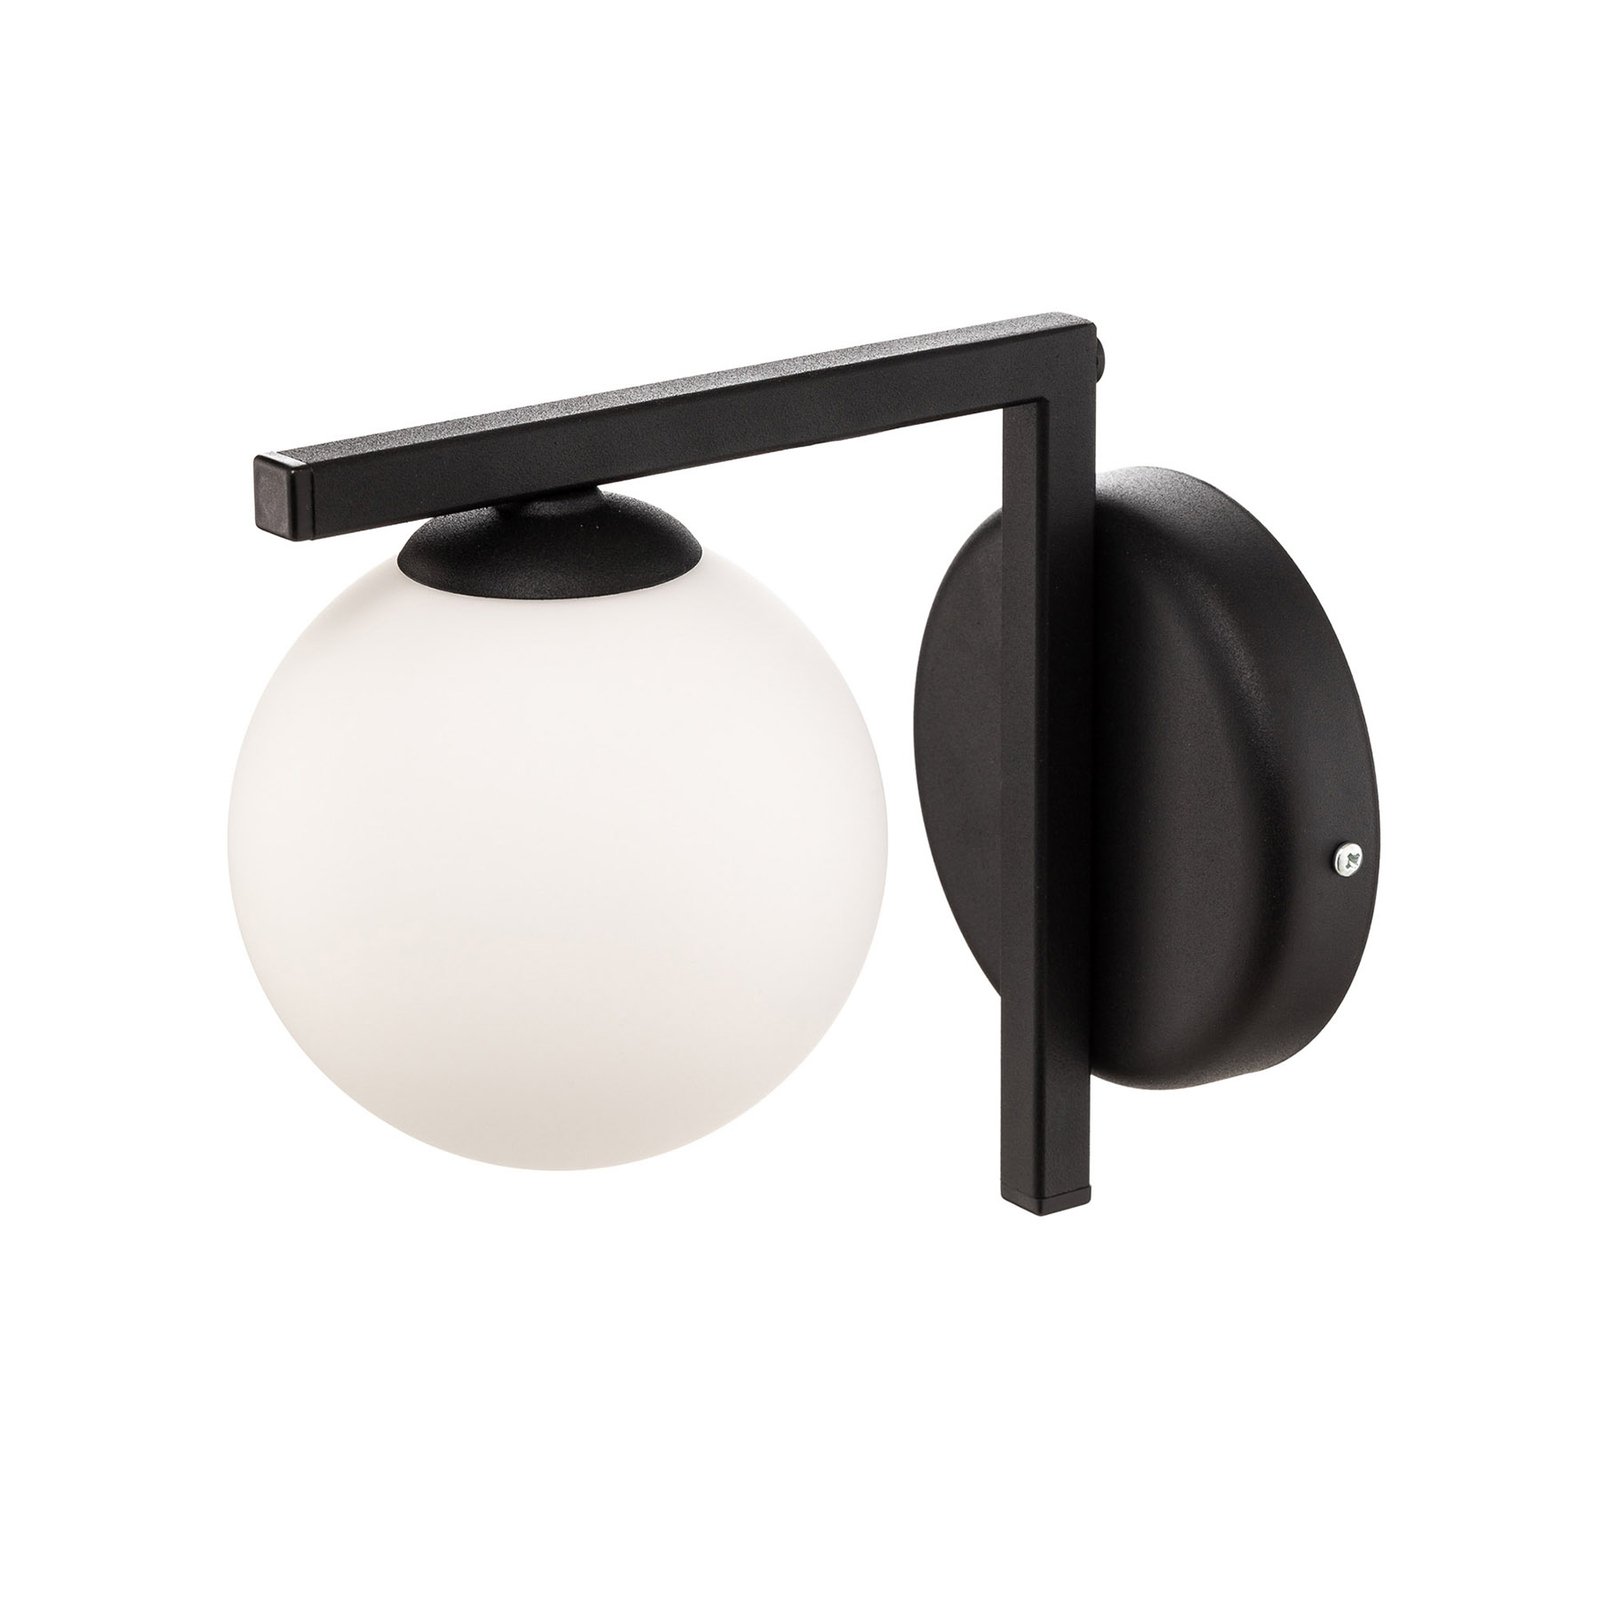 Zac wall light with spherical lampshade, black